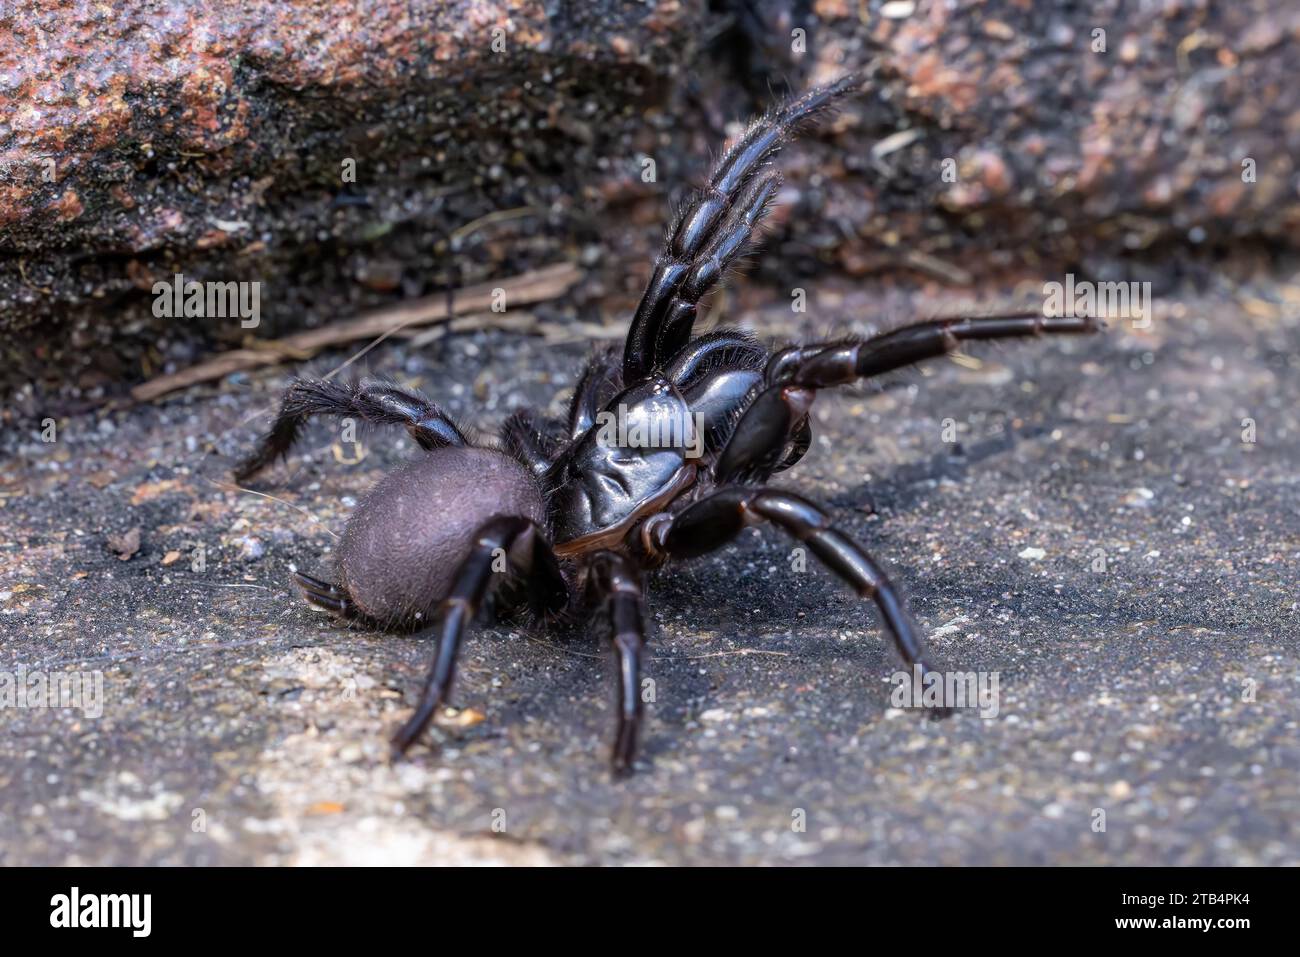 Female Sydney Funnel Web spider in defensive stance Stock Photo